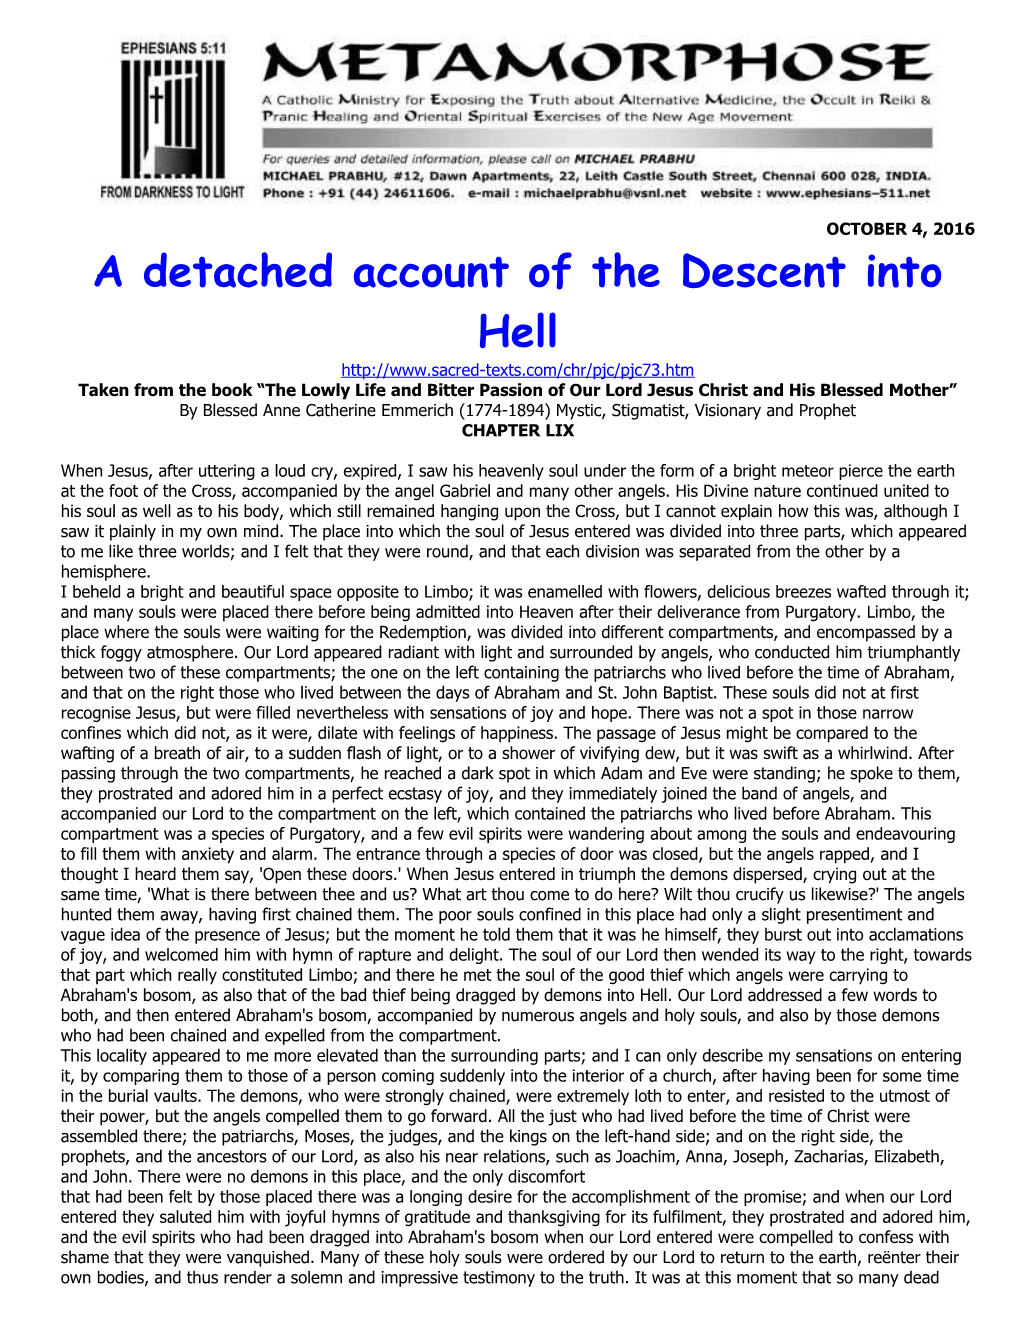 A Detached Account of the Descent Into Hell